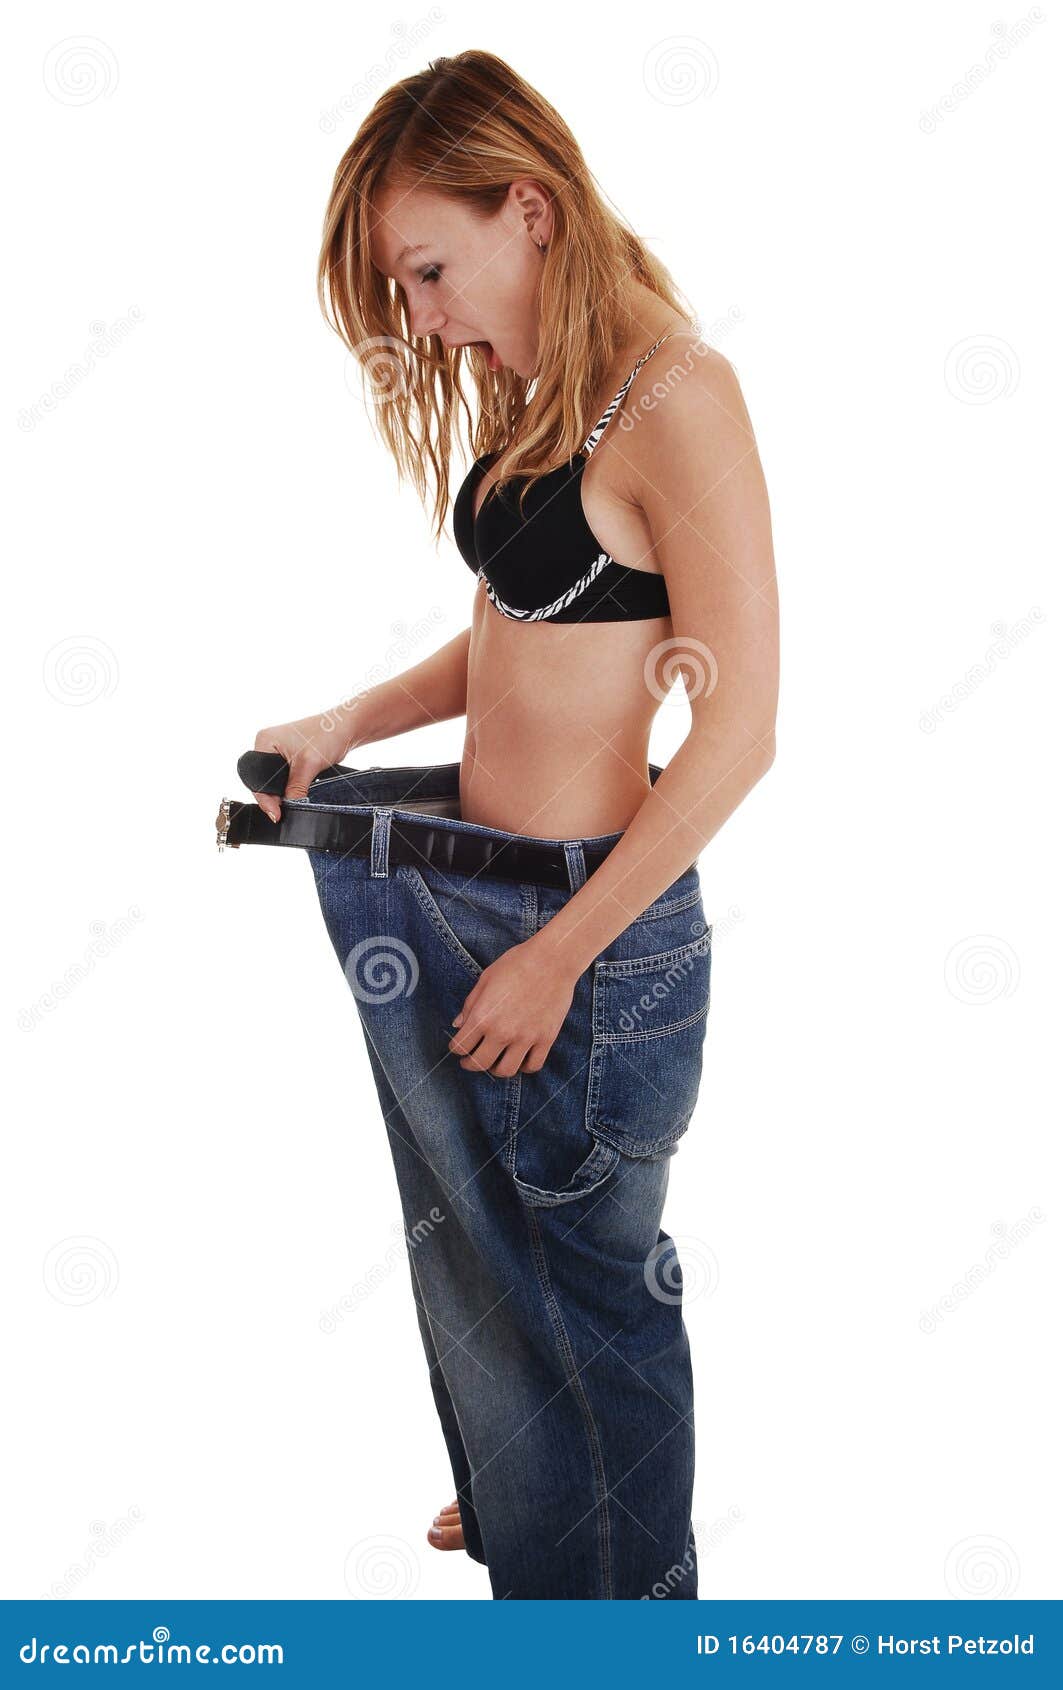 Girl lost lots weight. stock image. Image of lose, size - 16404787